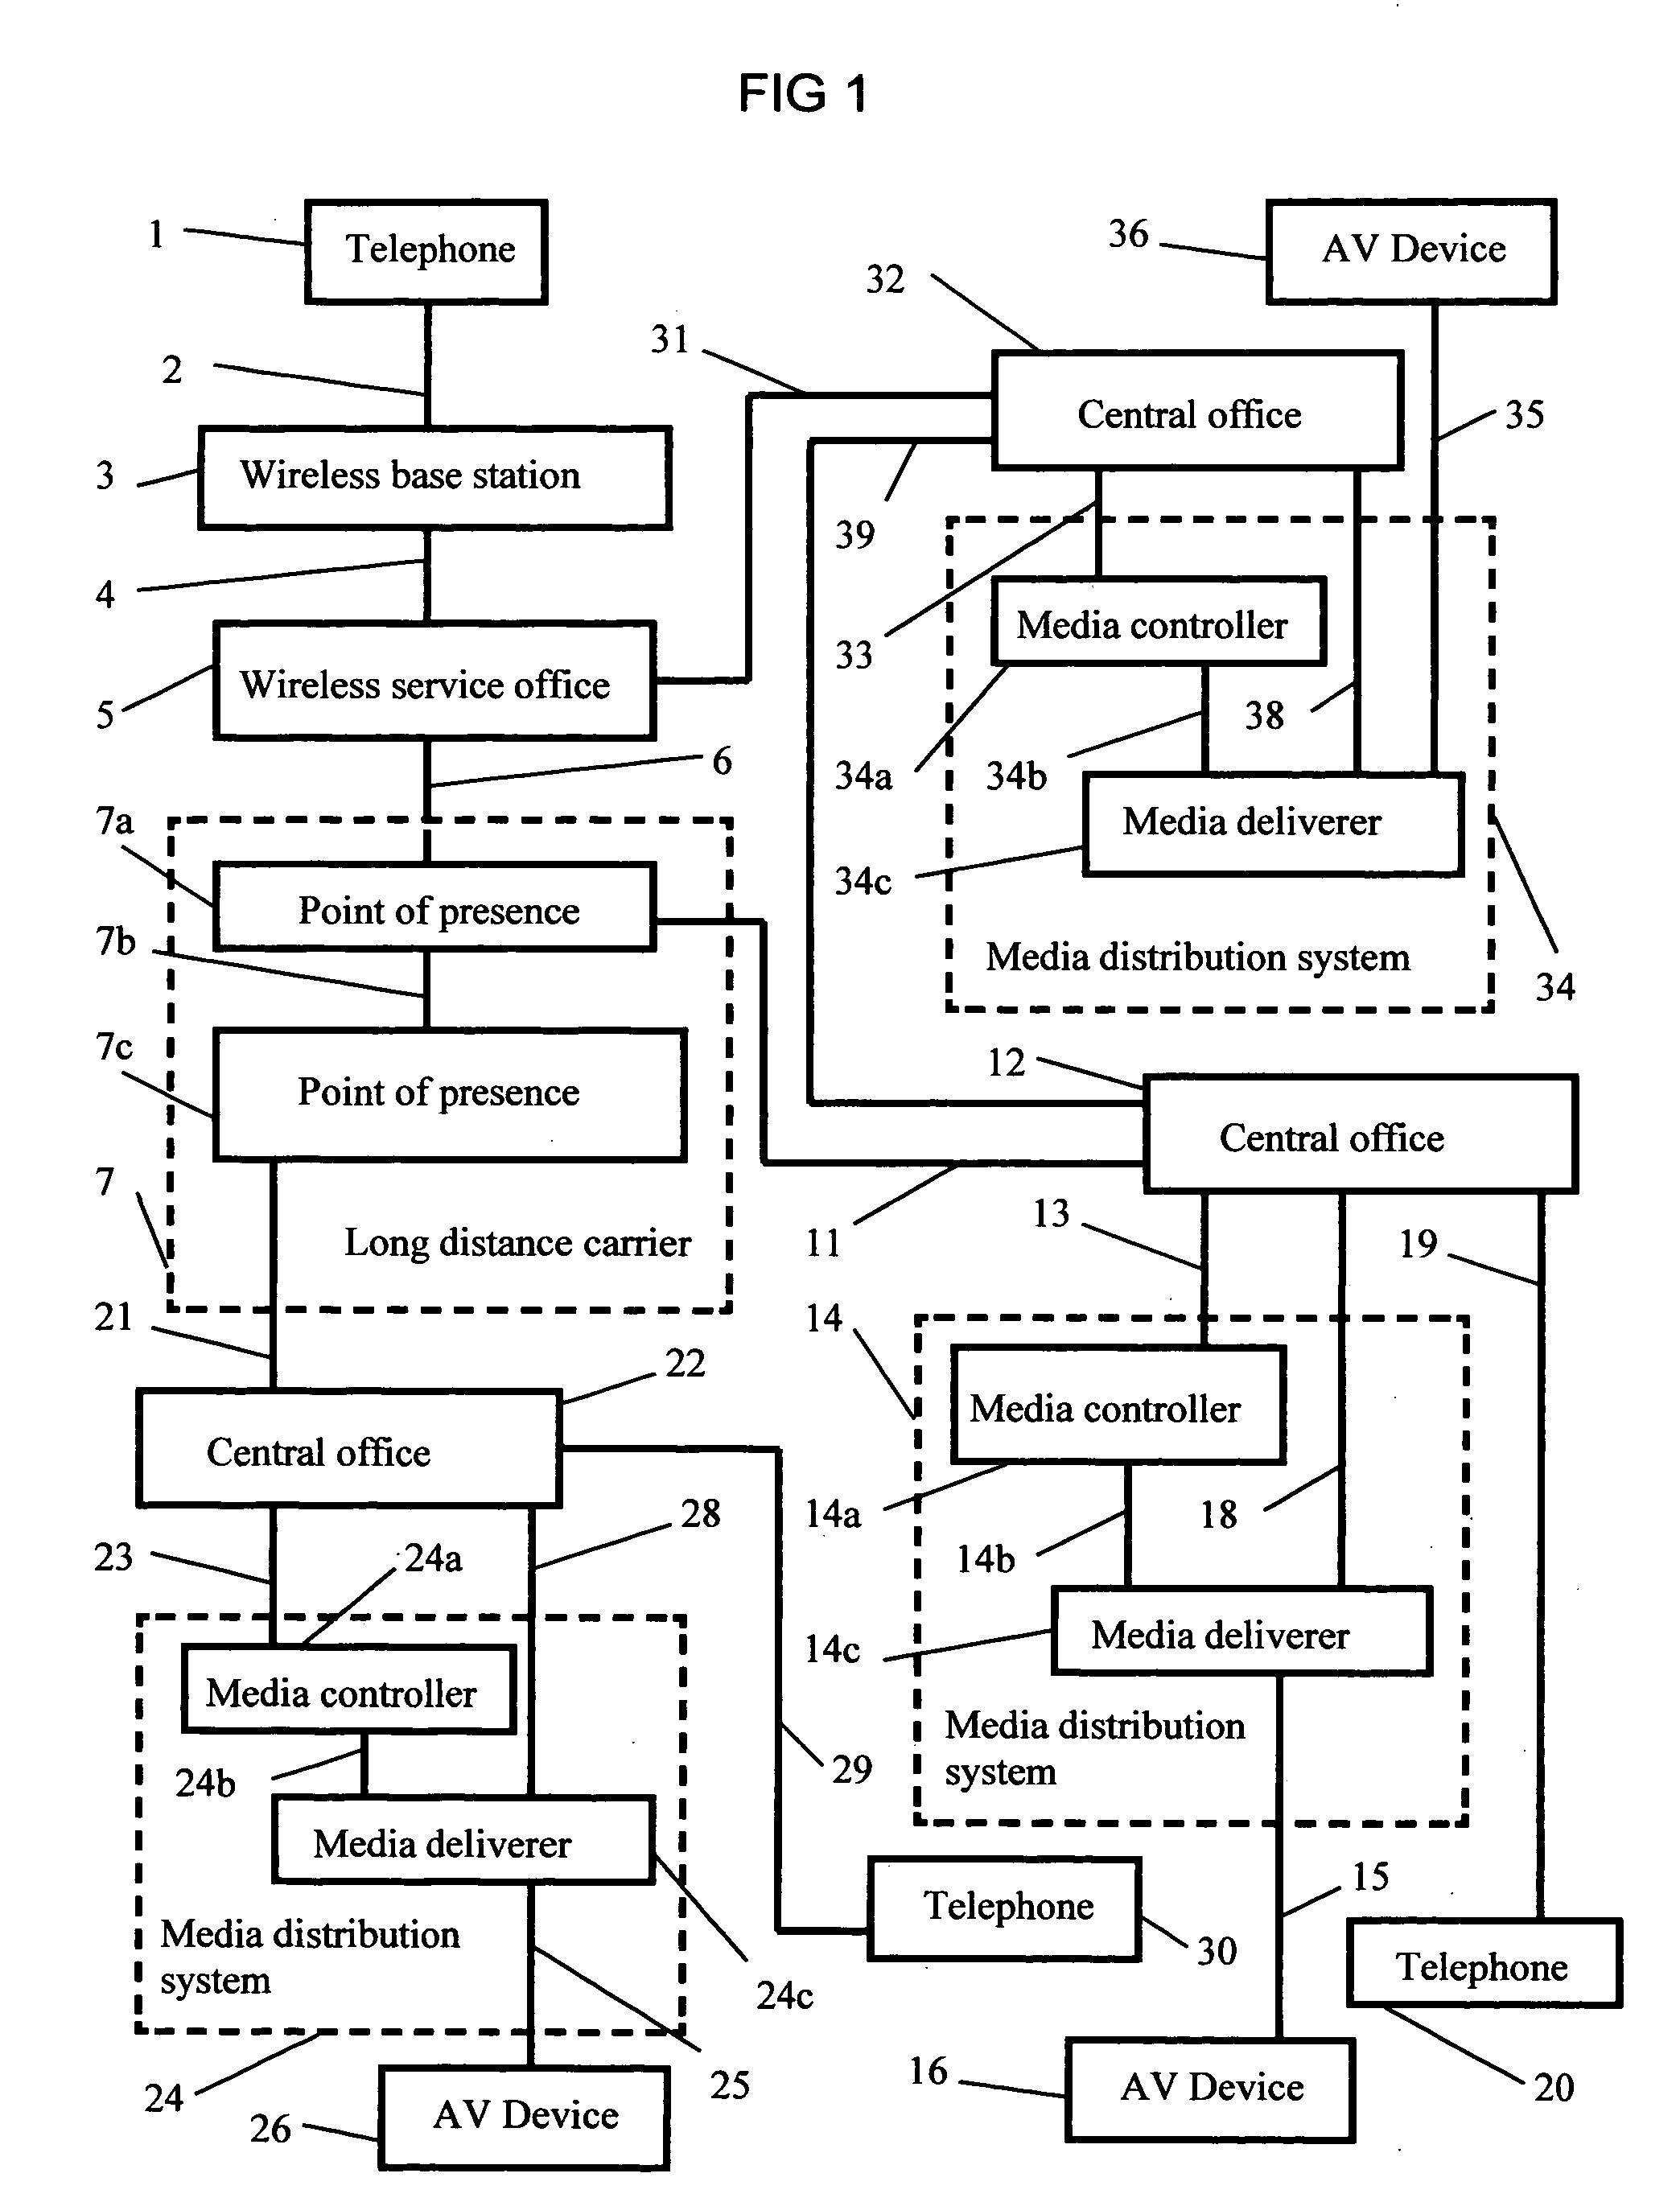 Method and apparatus for media distribution system